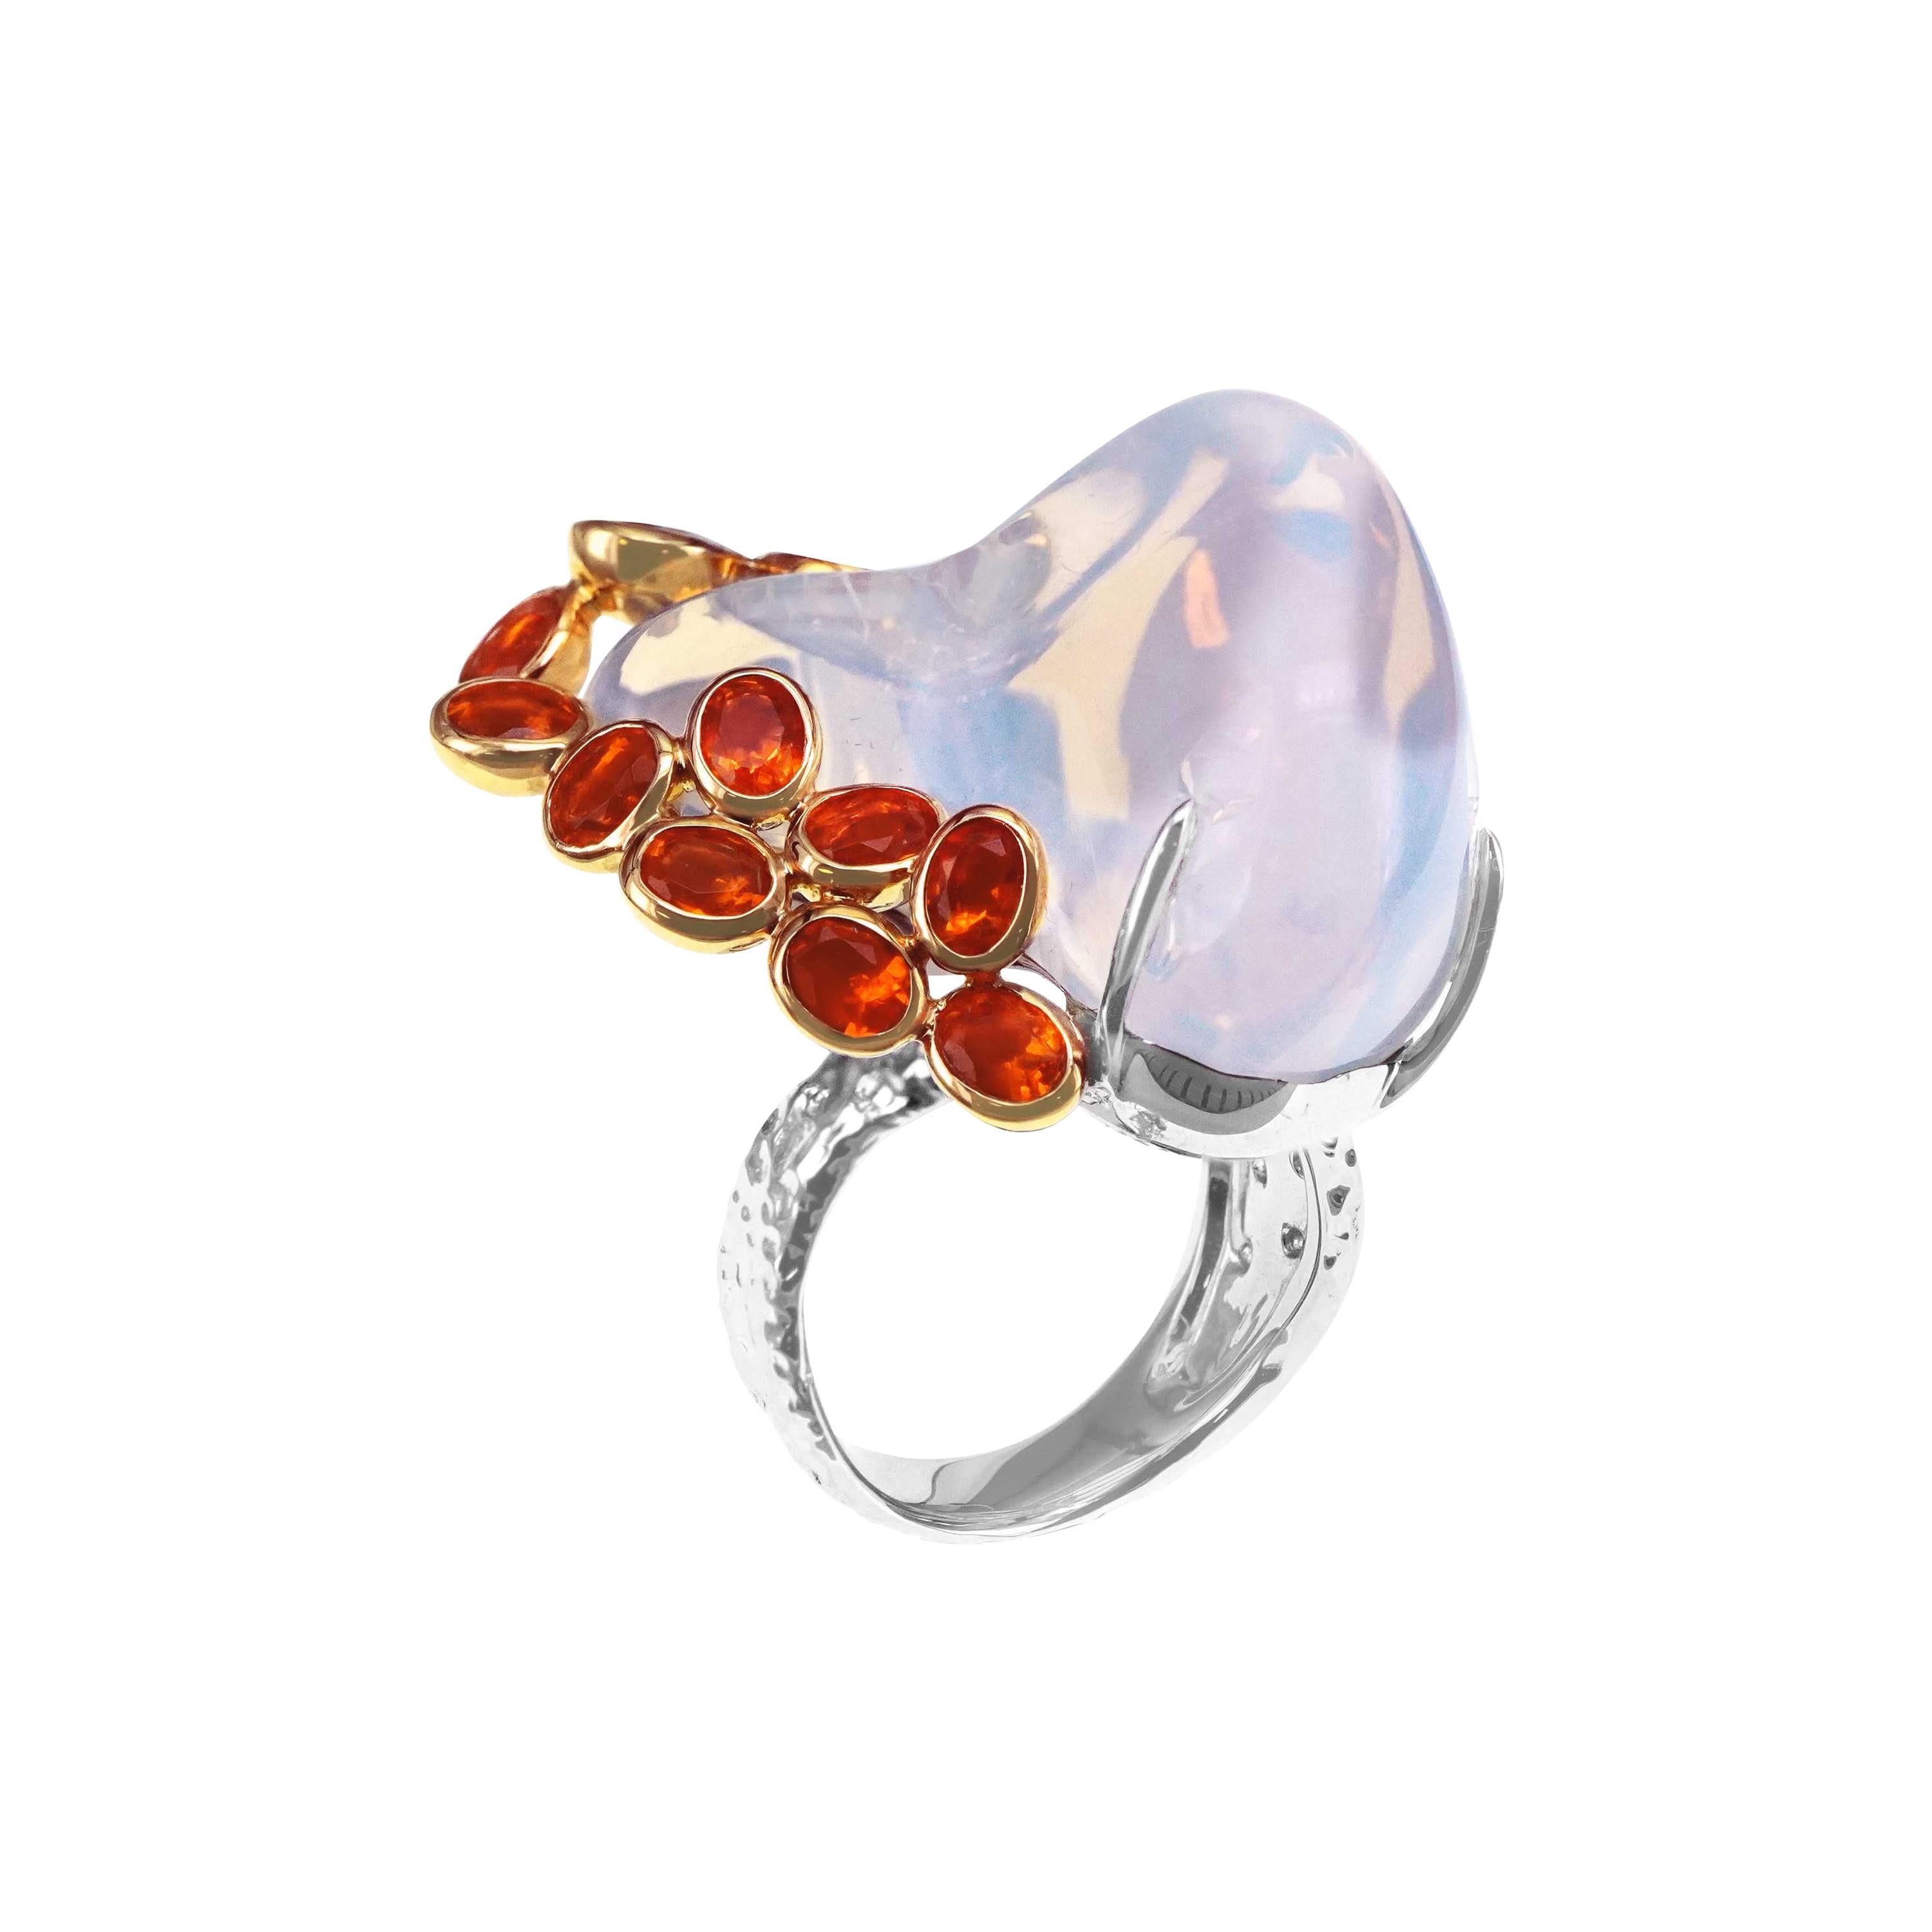 40.44 Carat Mexican Opal Gigantic One of a Kind Ring For Sale